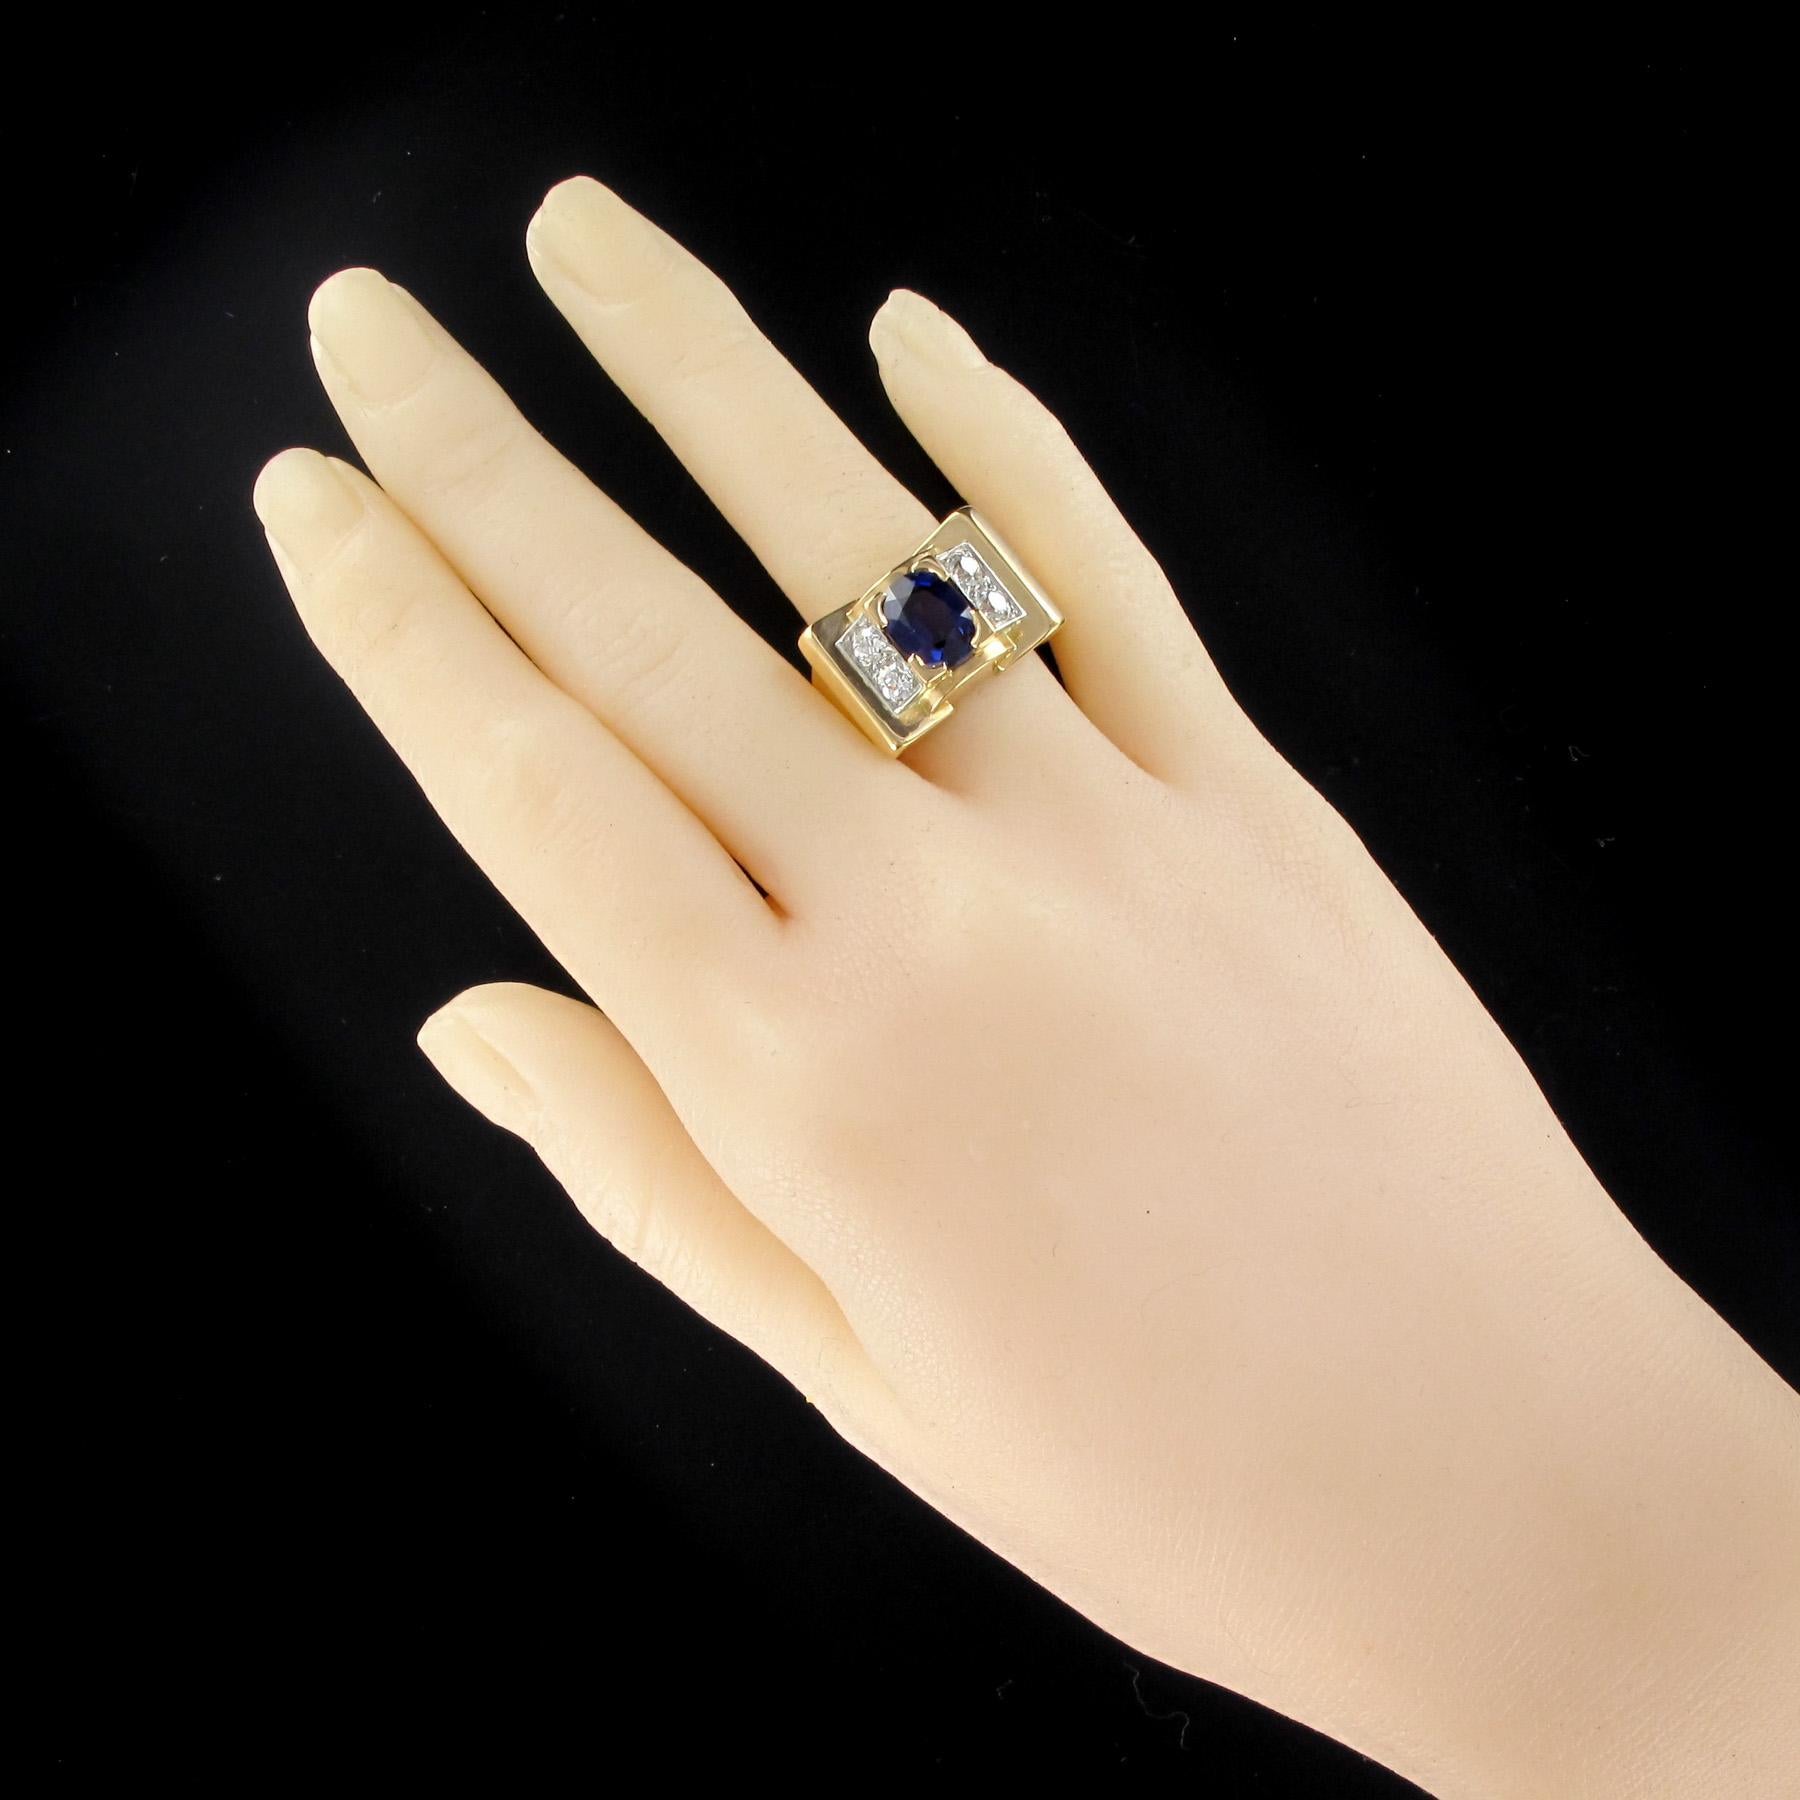 Ring in 18 karat yellow gold, owl hallmark, and platinum mascaron hallmark.
Signed Mellerio dits Meller, this sumptuous ring is set with a natural and unheated color change cushion- cut sapphire that goes from an intense blue and bright under